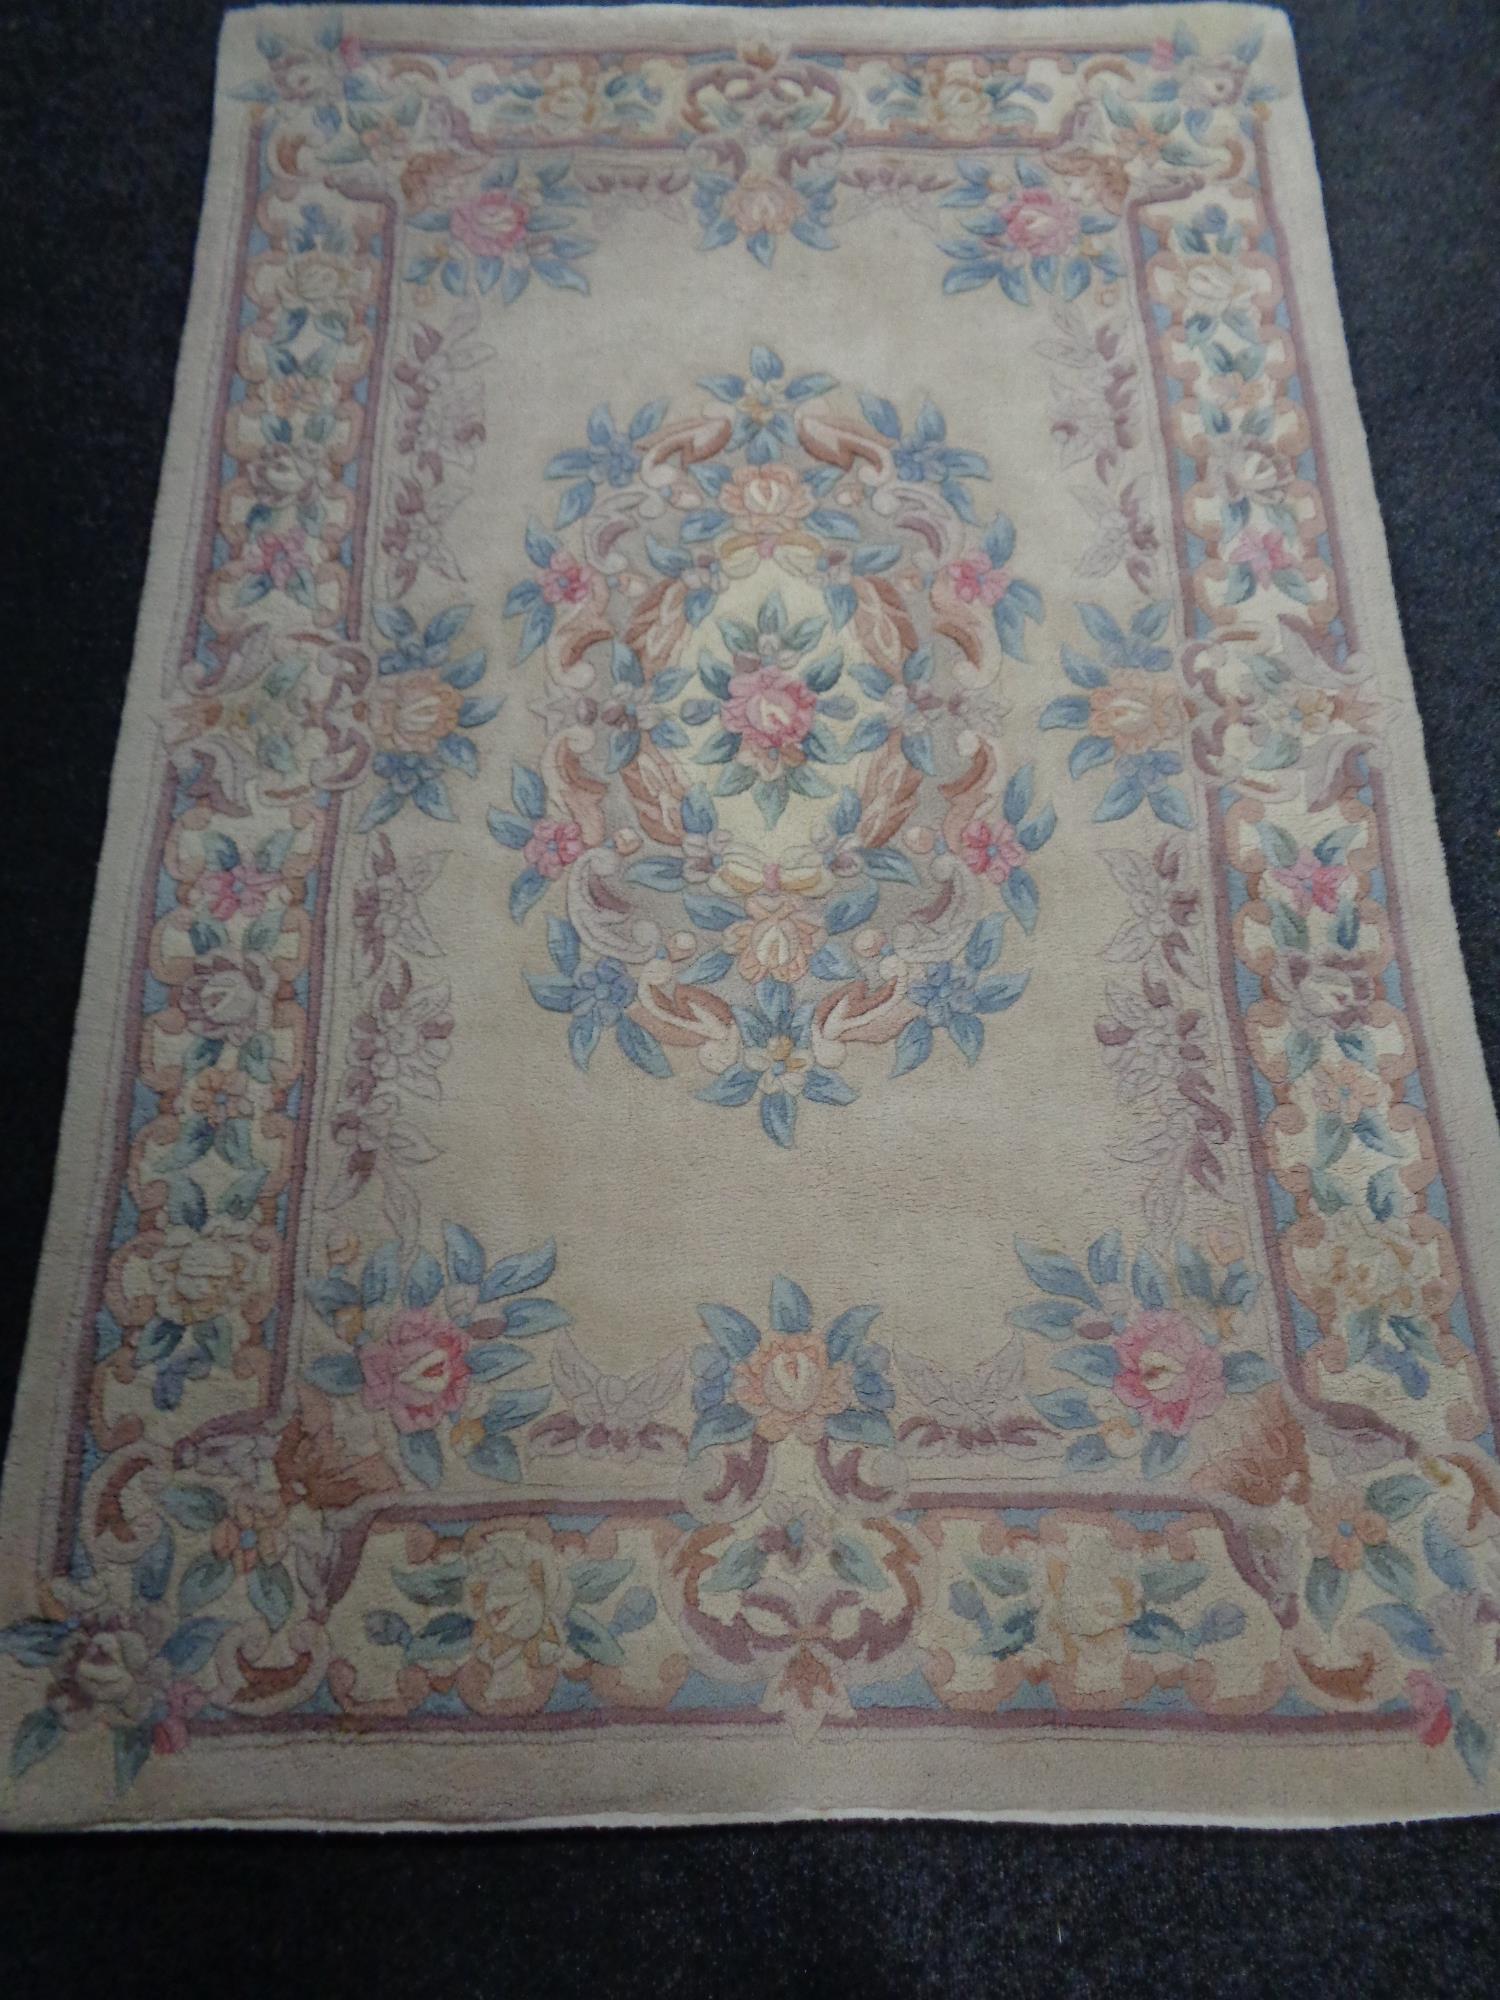 A floral Chinese rug on beige ground.